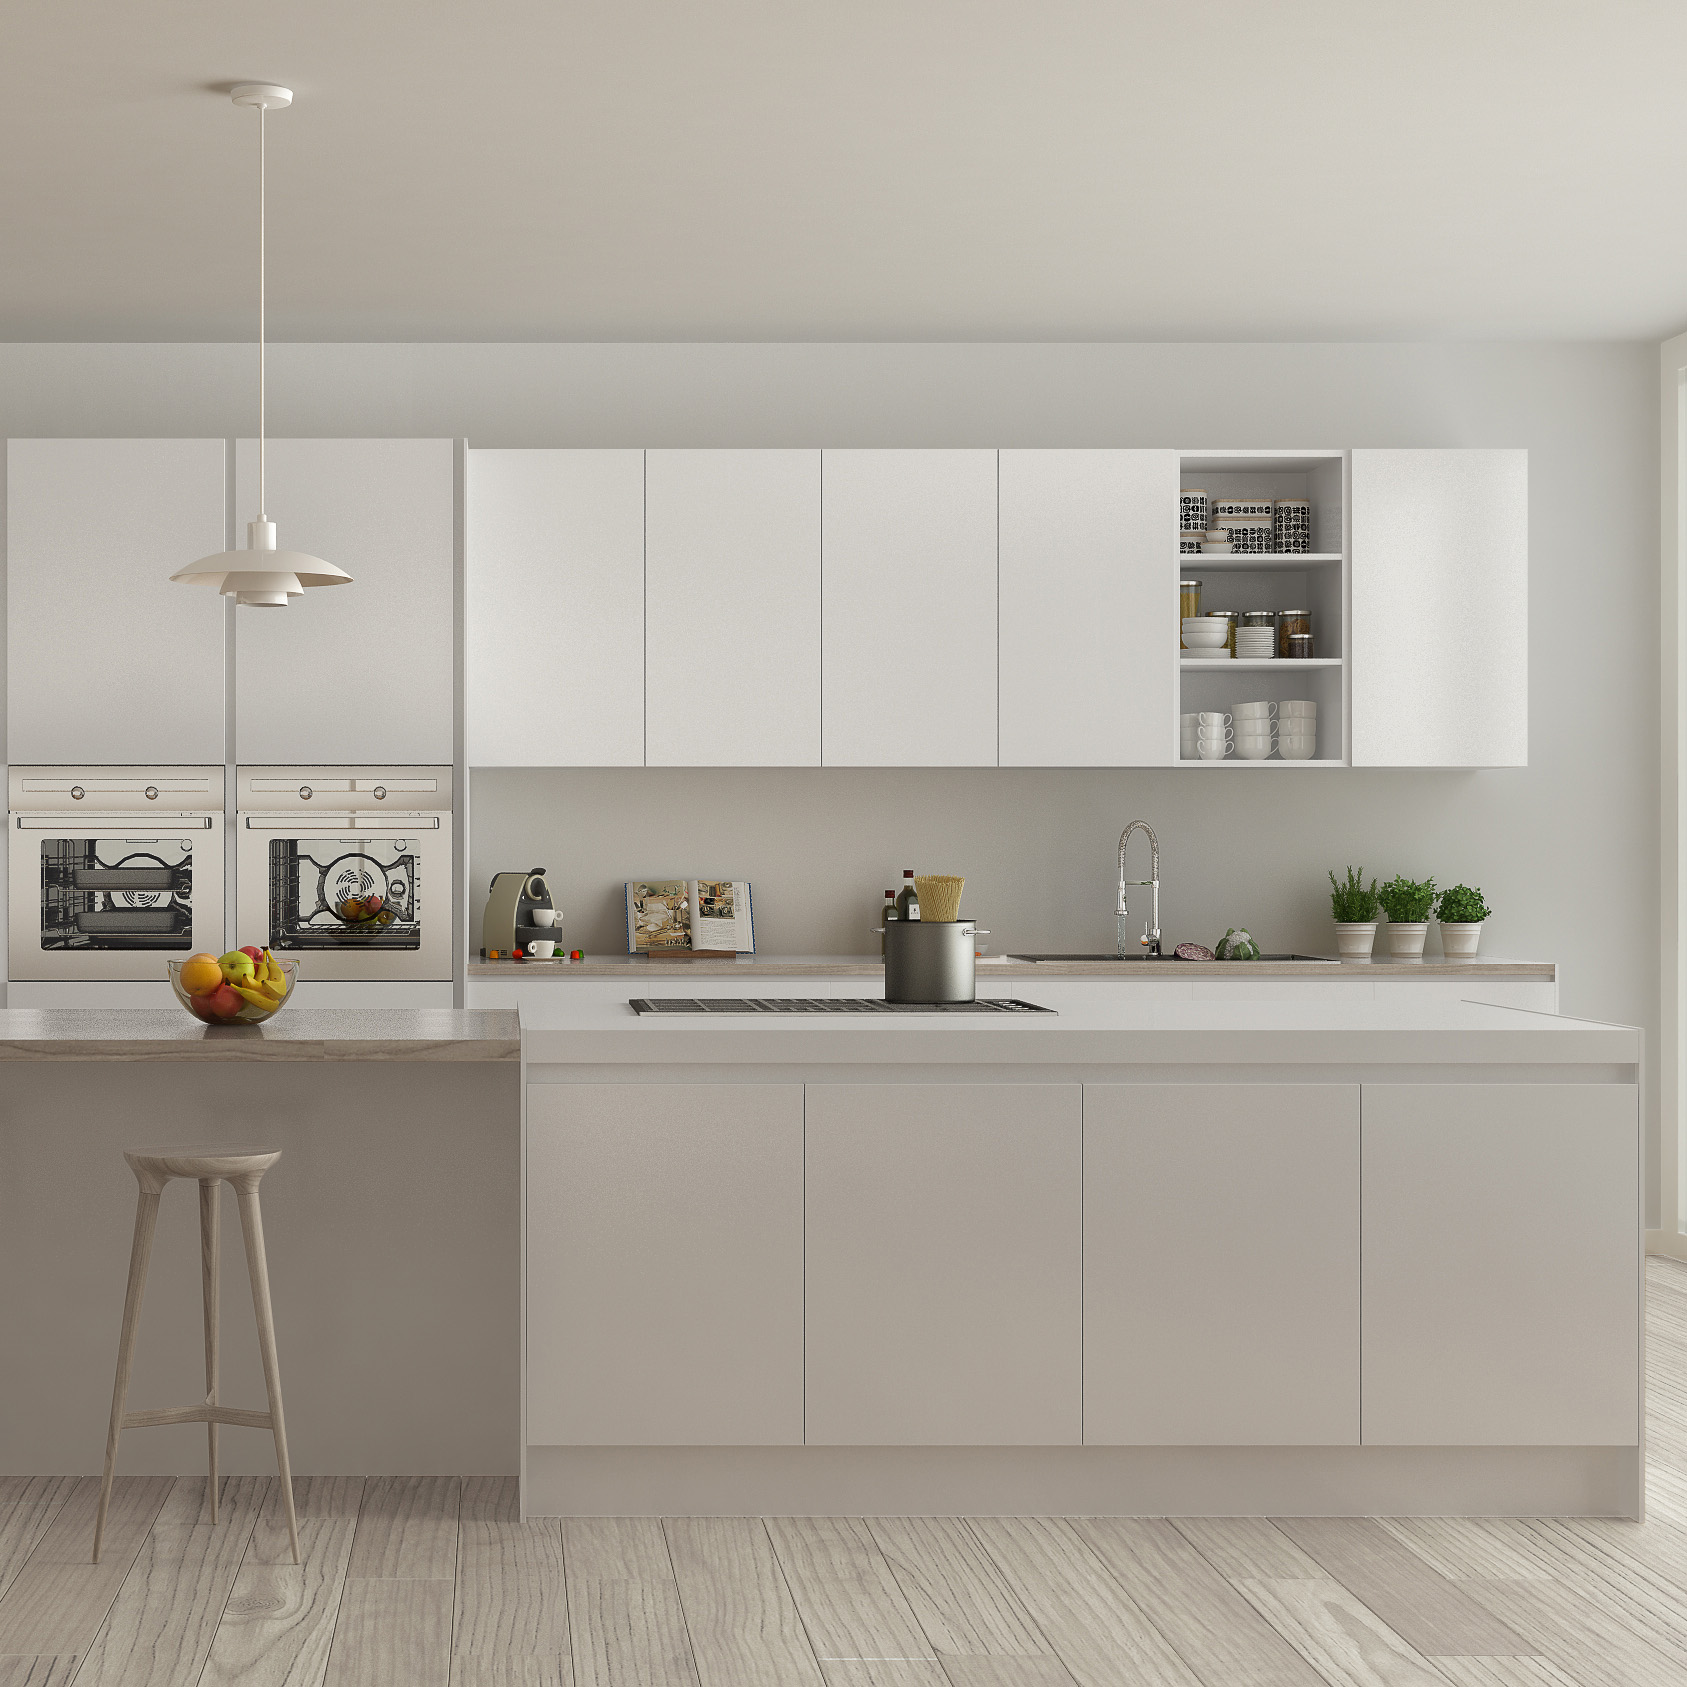 Competitive Price for Birch Cabinets -
 Kangton Matt Grey Lacquer Kitchen Cabinet with MDF Customized Design – Kangton